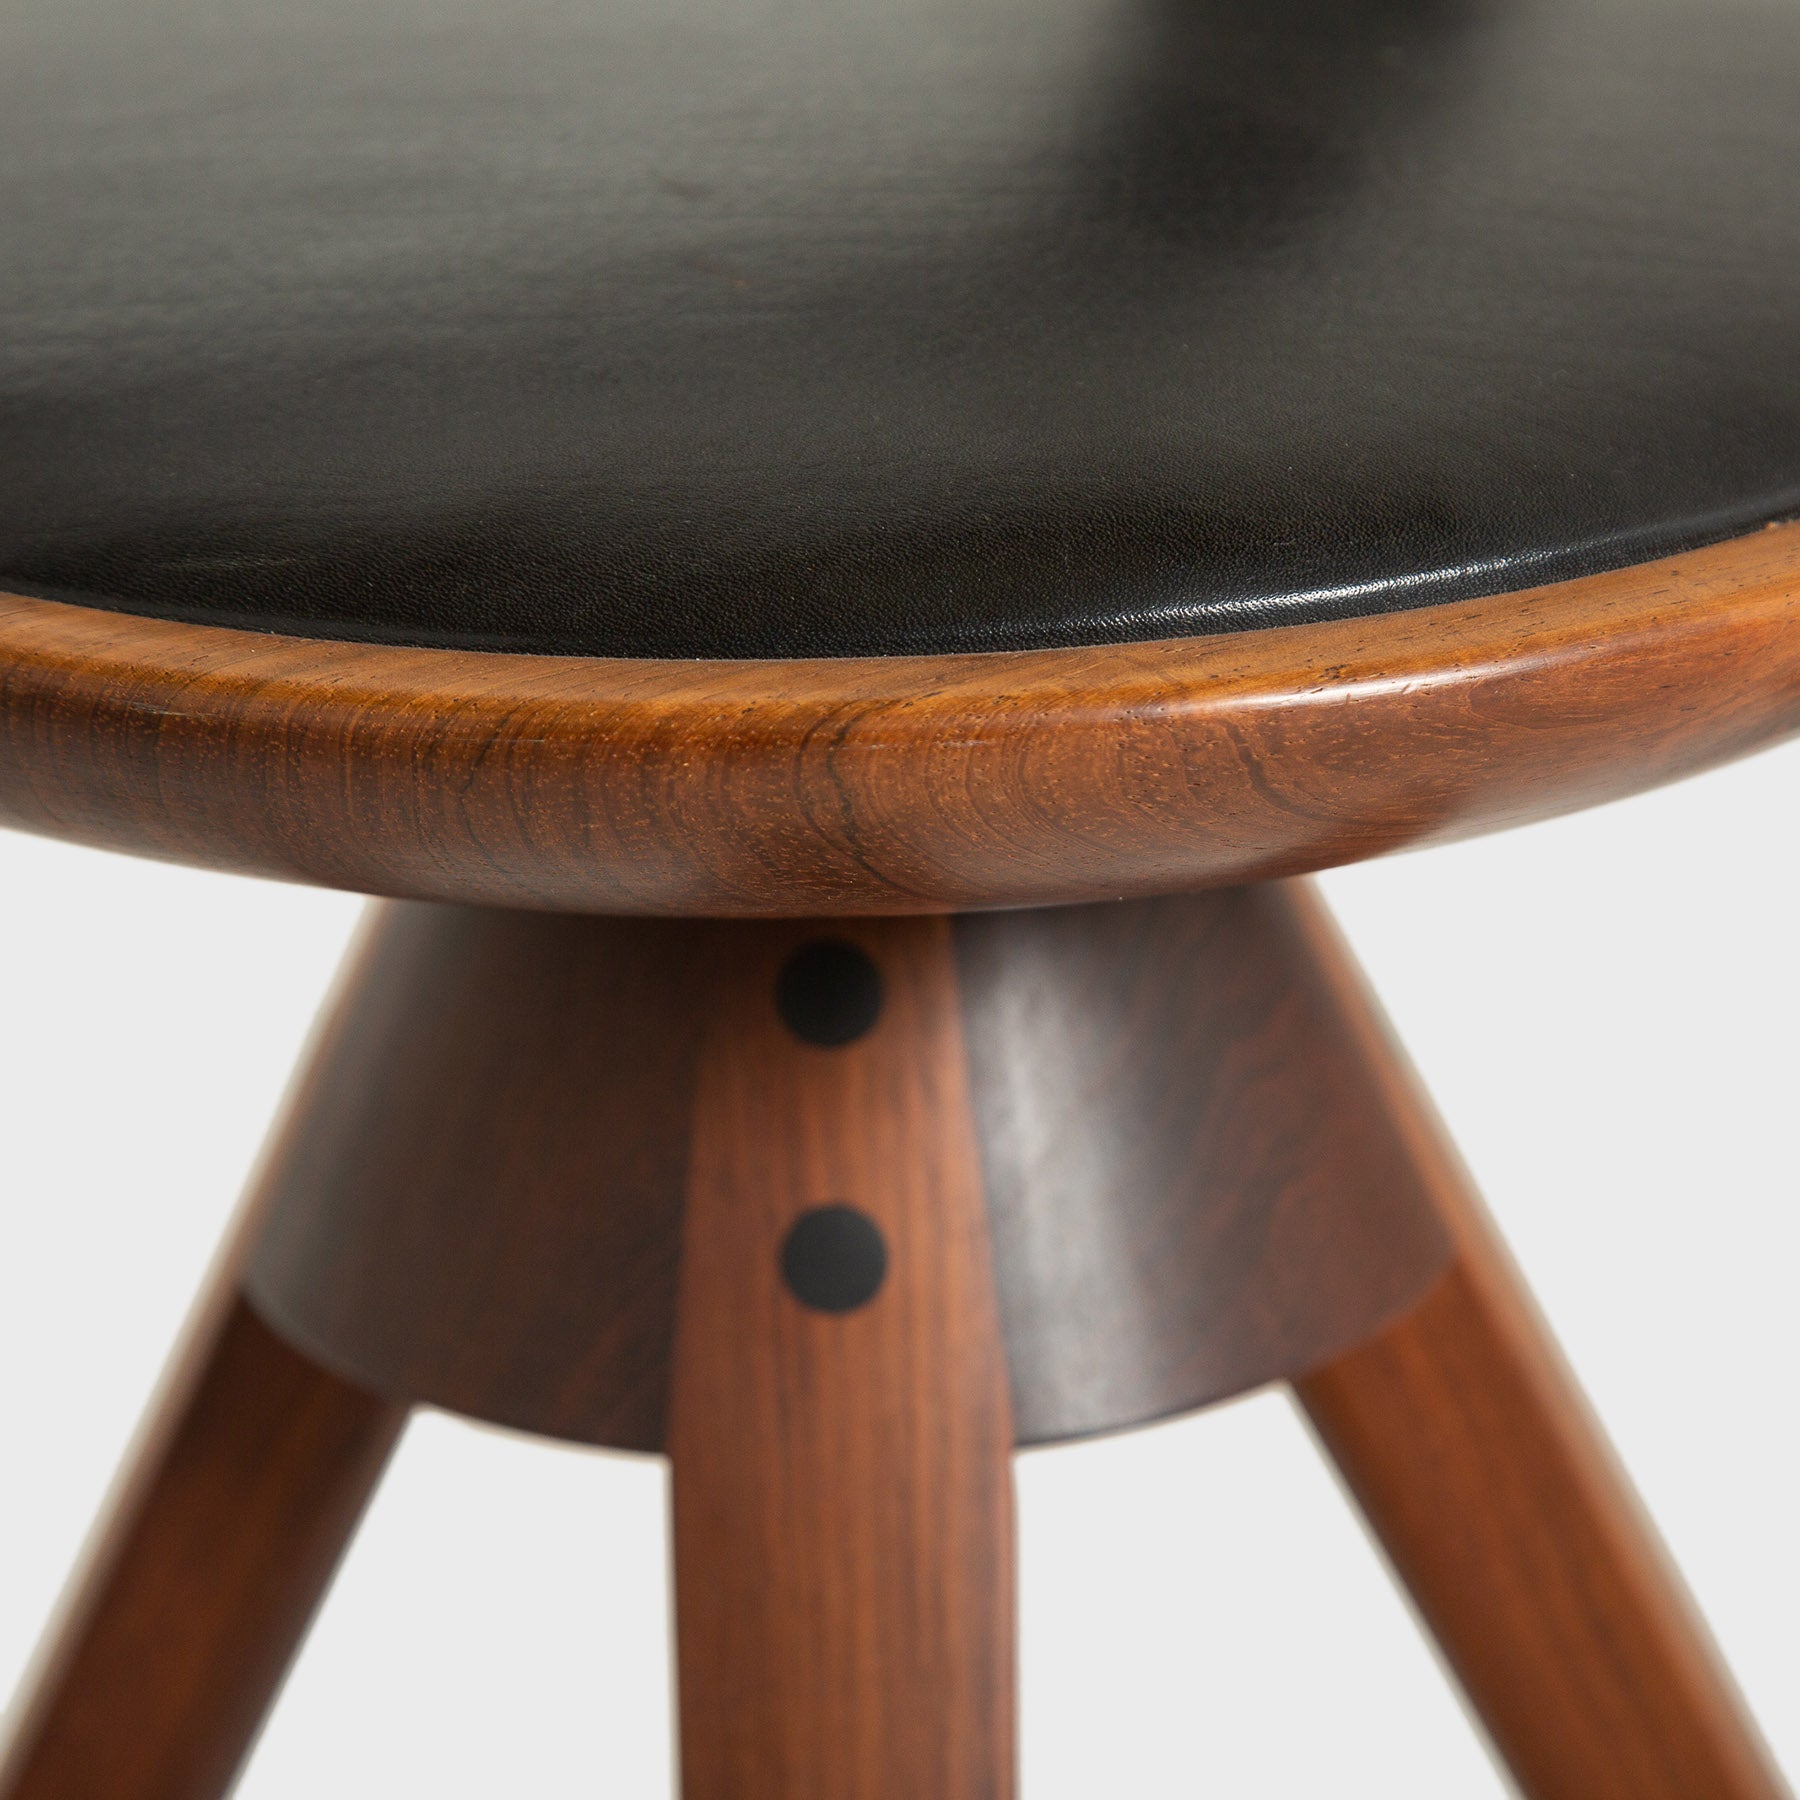 MAXFIELD PRIVATE COLLECTION | PAIR OF 1957 KINDT-LARSEN STOOLS